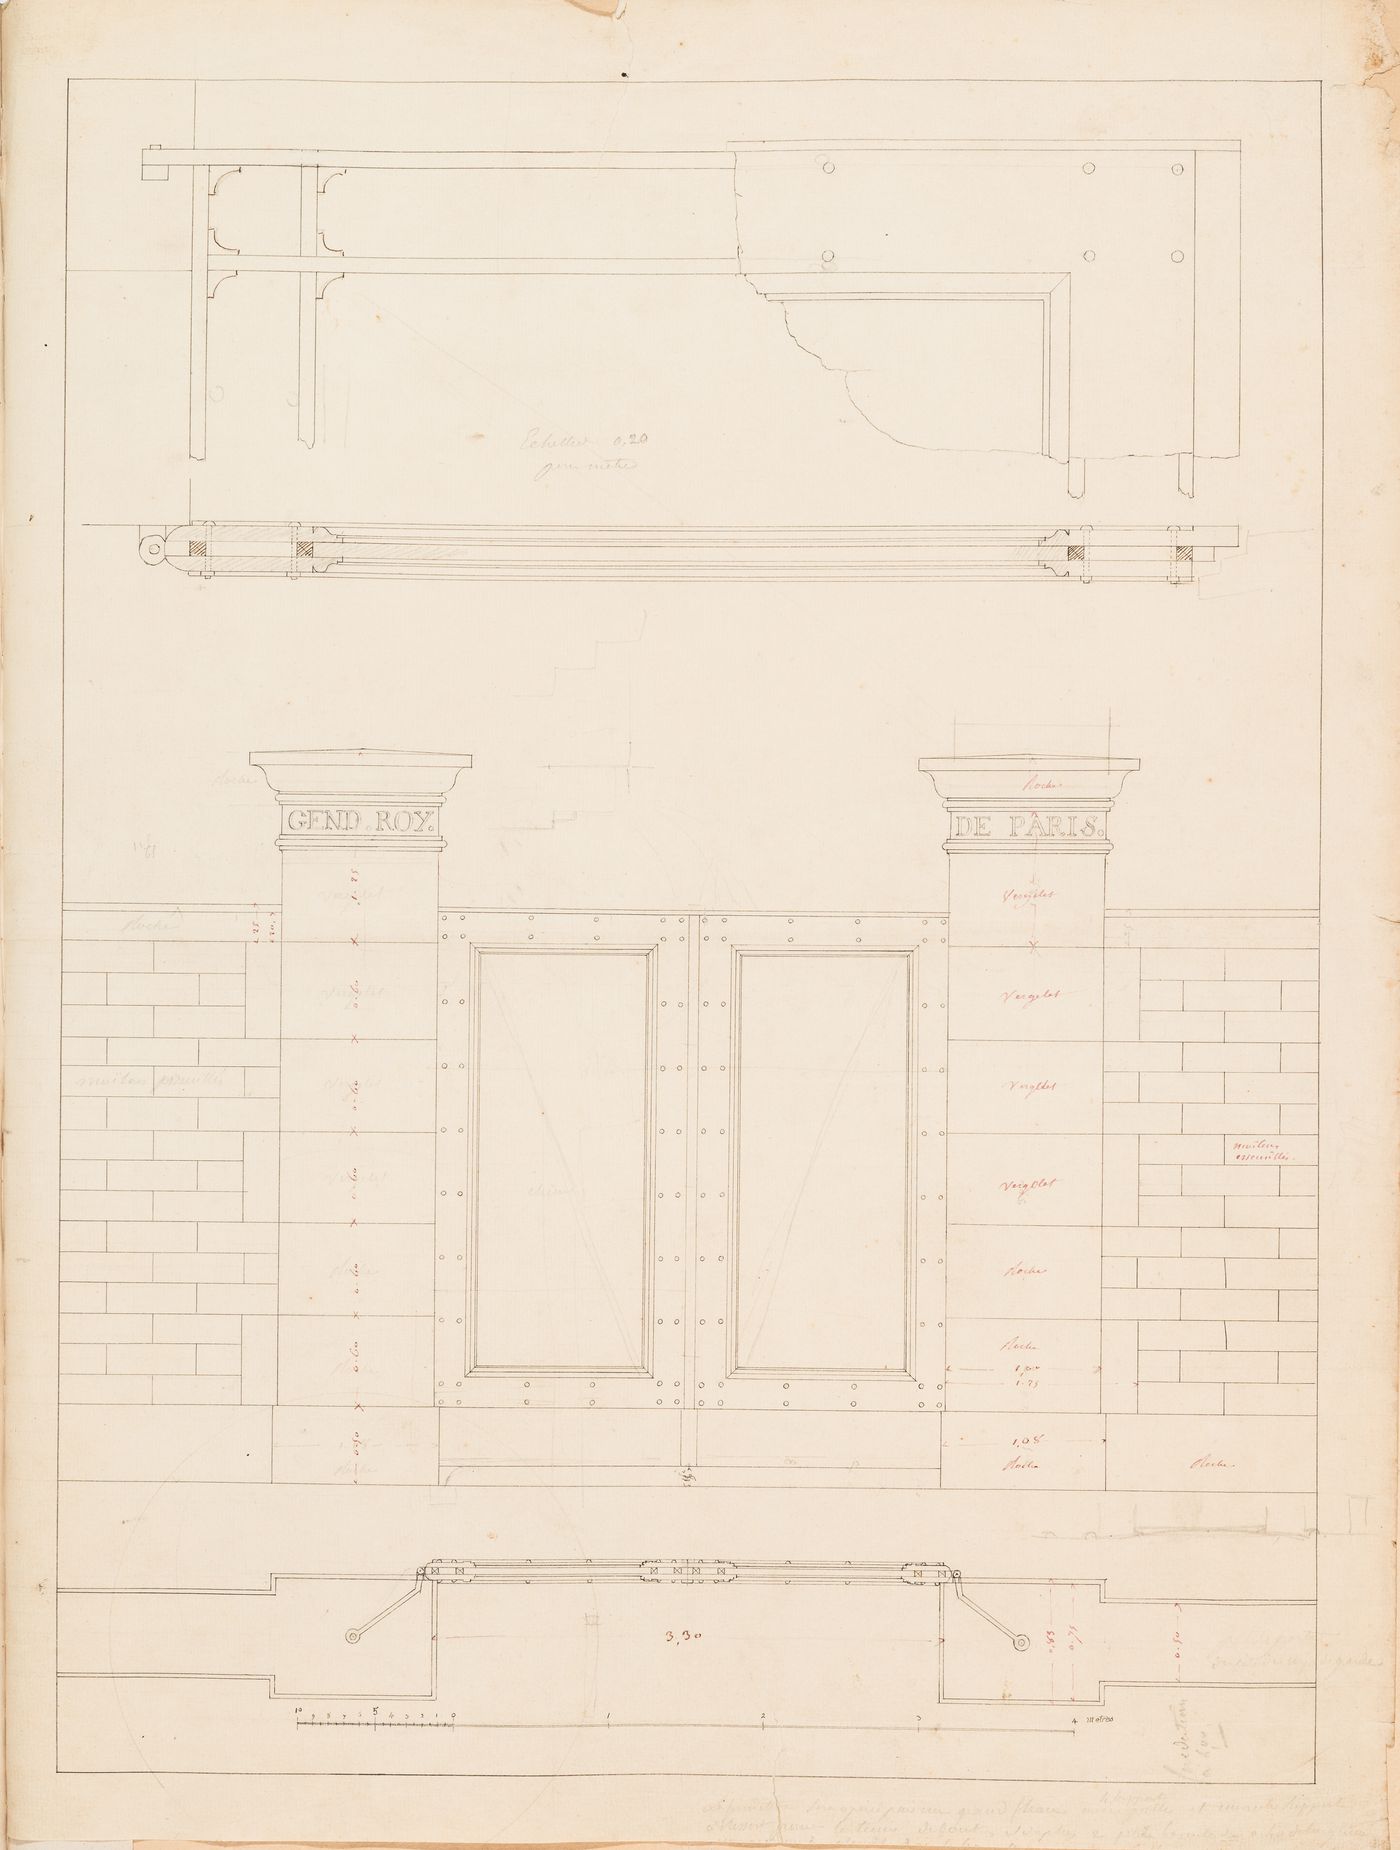 Project for alterations to the Caserne des Minimes, rue des Minimes: Plan, elevation, sectional elevation, and section for an entrance gateway